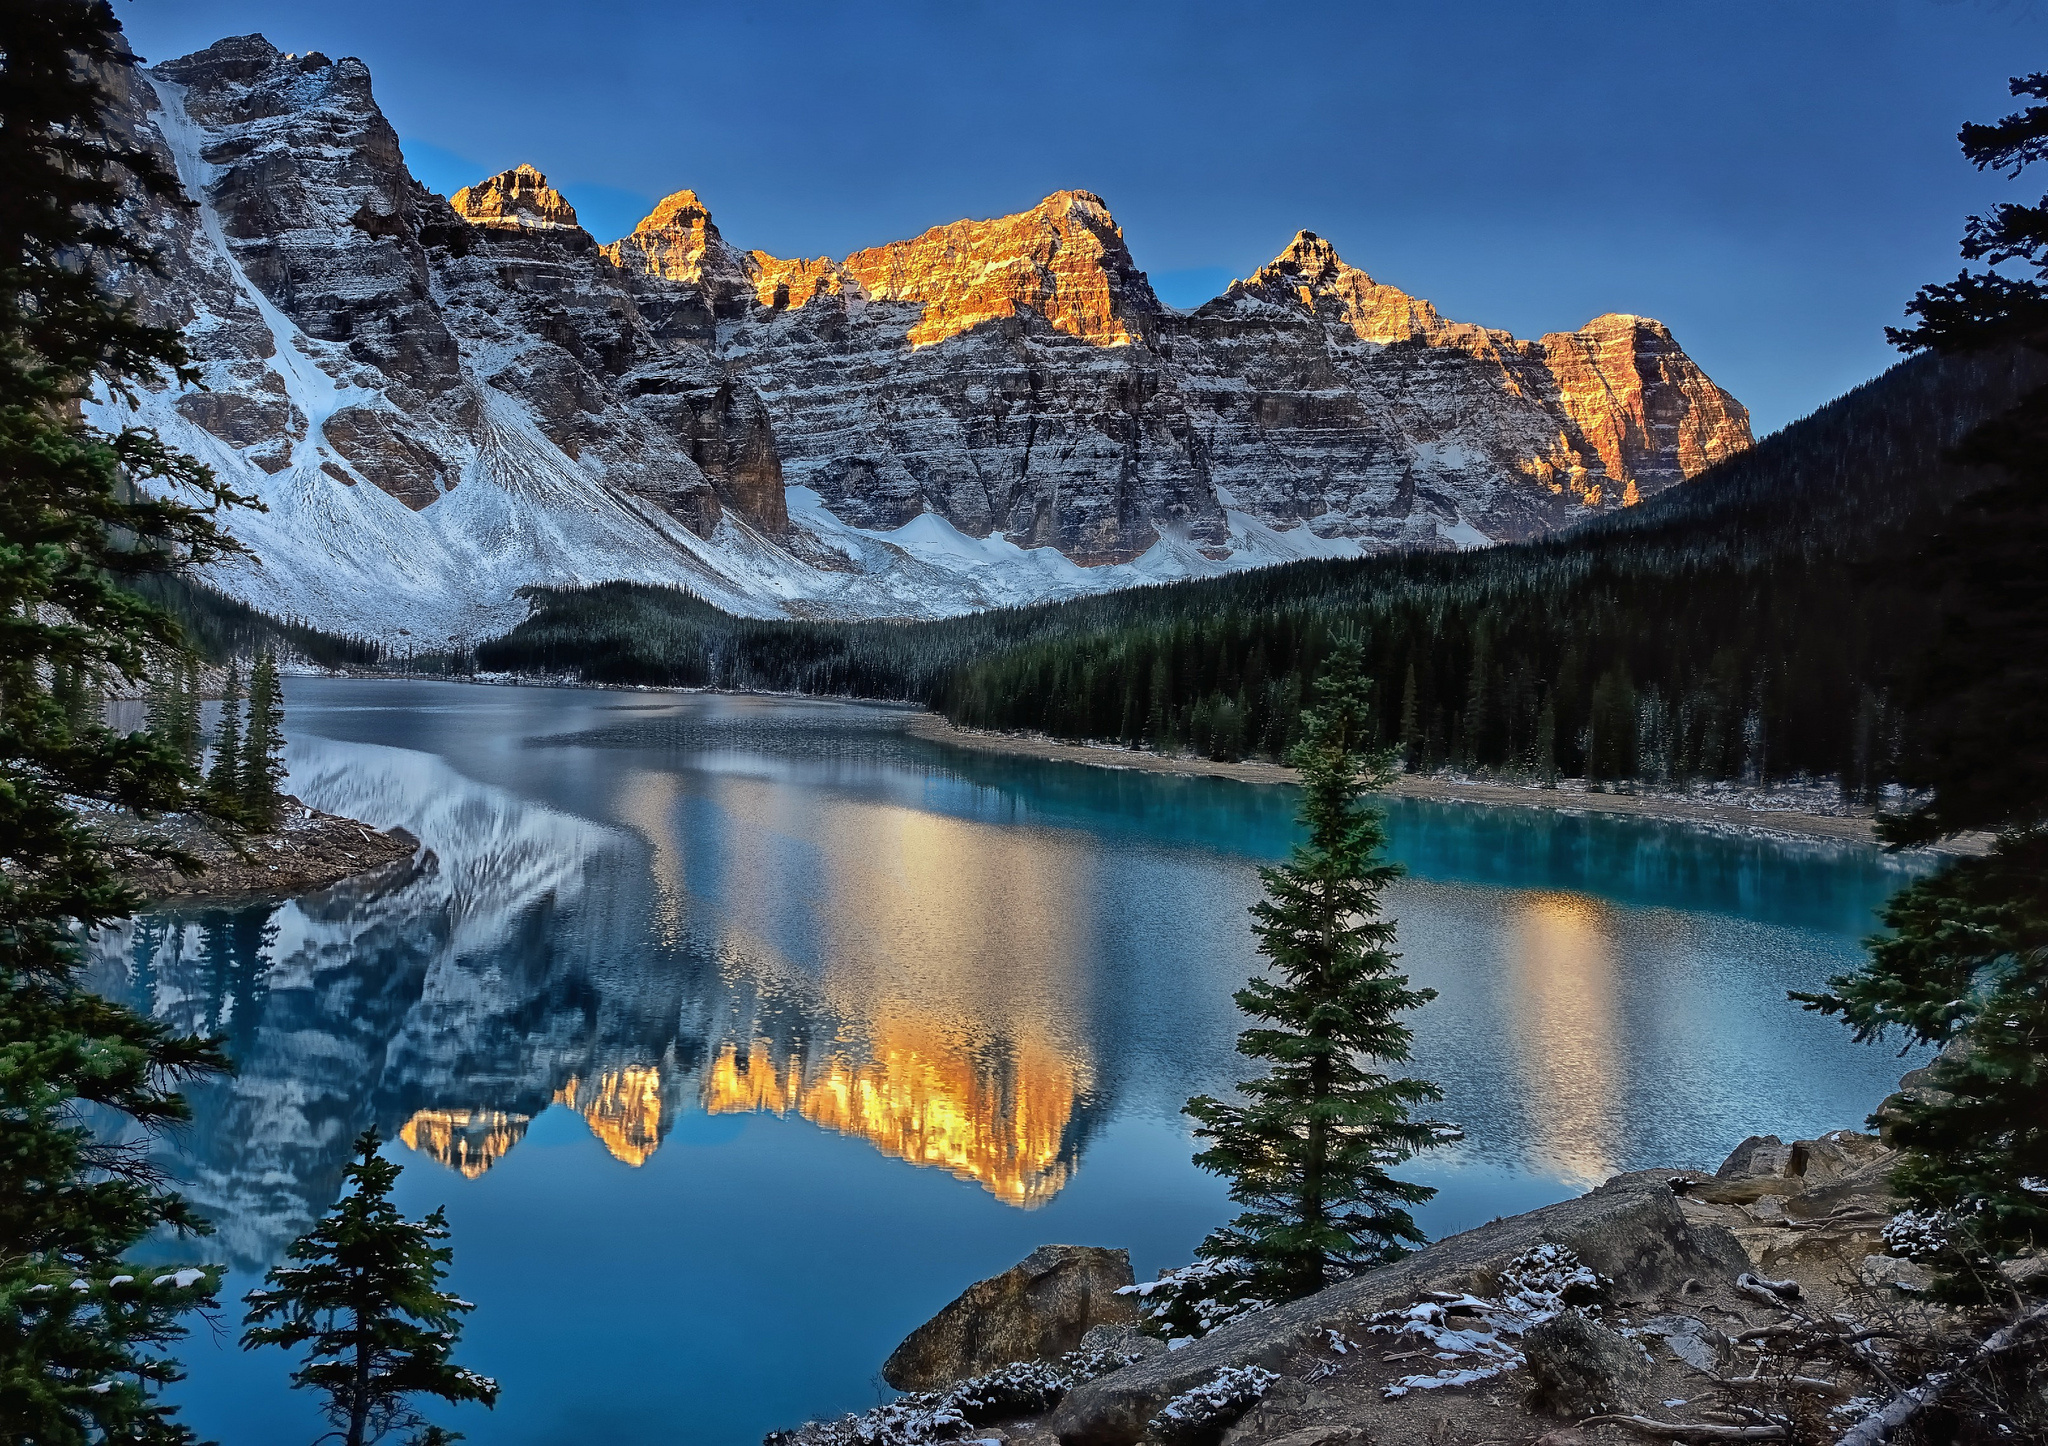 earth, reflection, banff national park, canada, lake, moraine lake, mountain, valley of the ten peaks cellphone